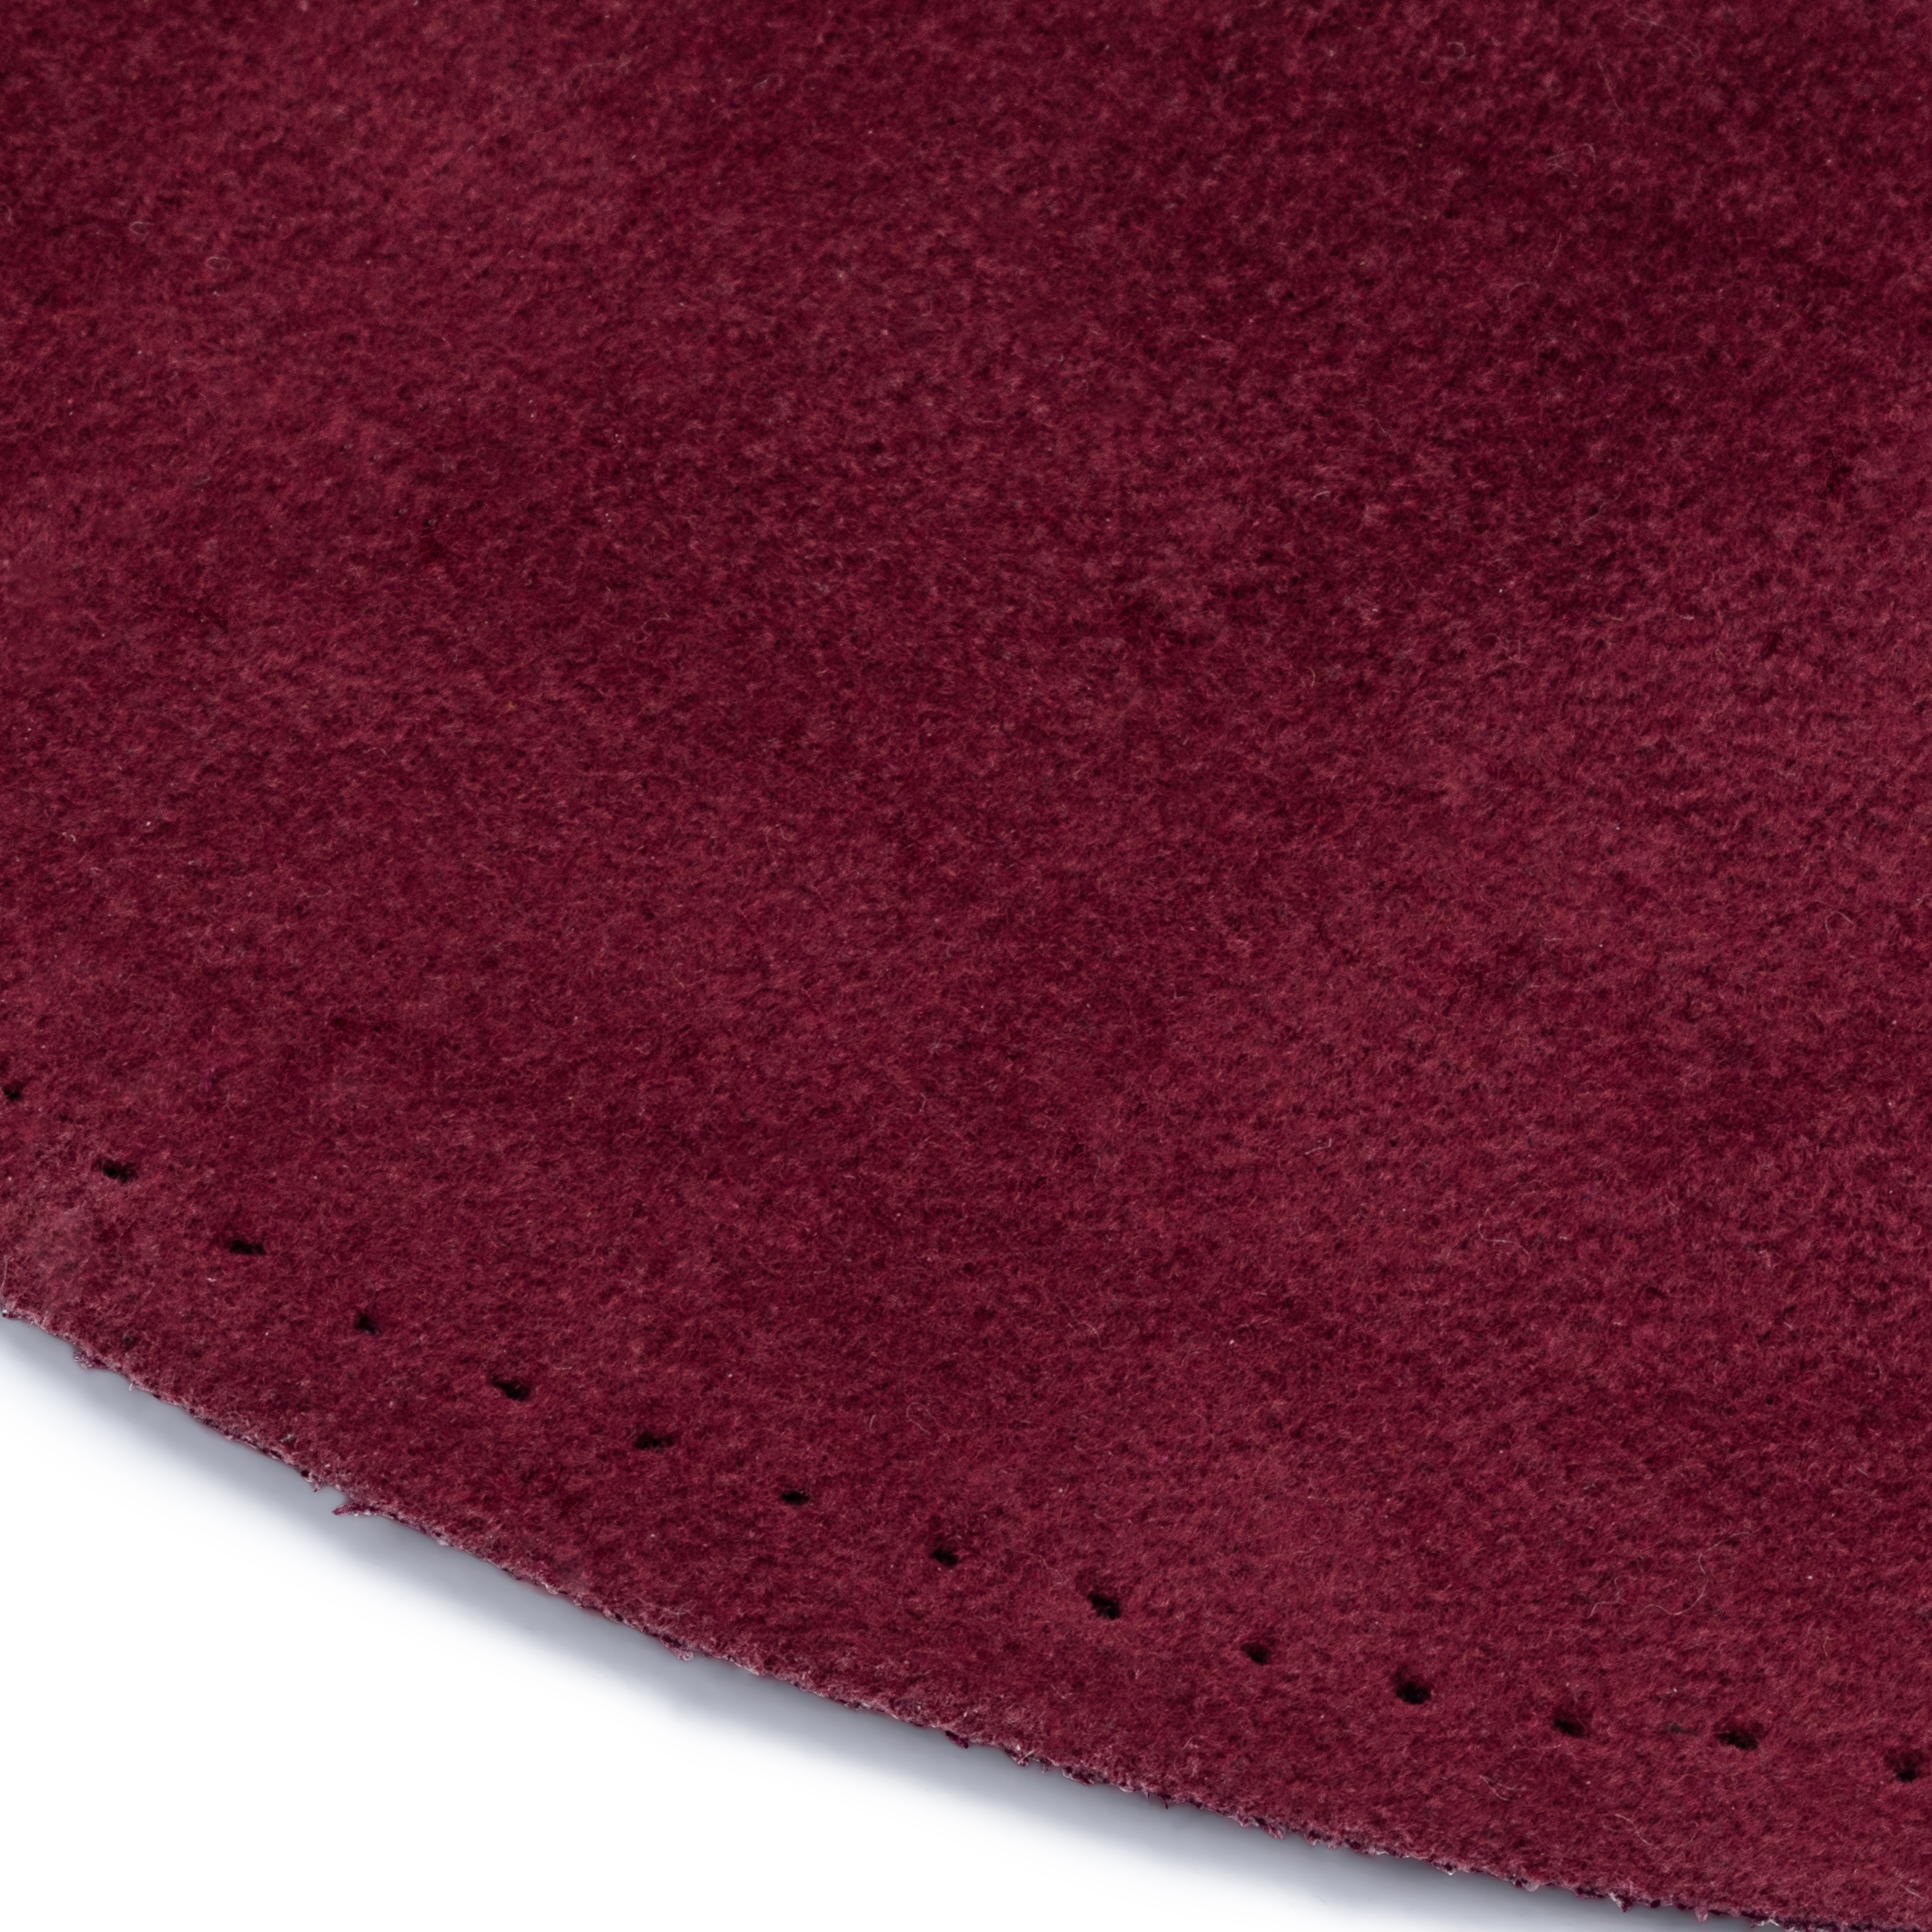 Patches imitation suede for ironing/sewing on 10 x 14 cm dark red, 2 St